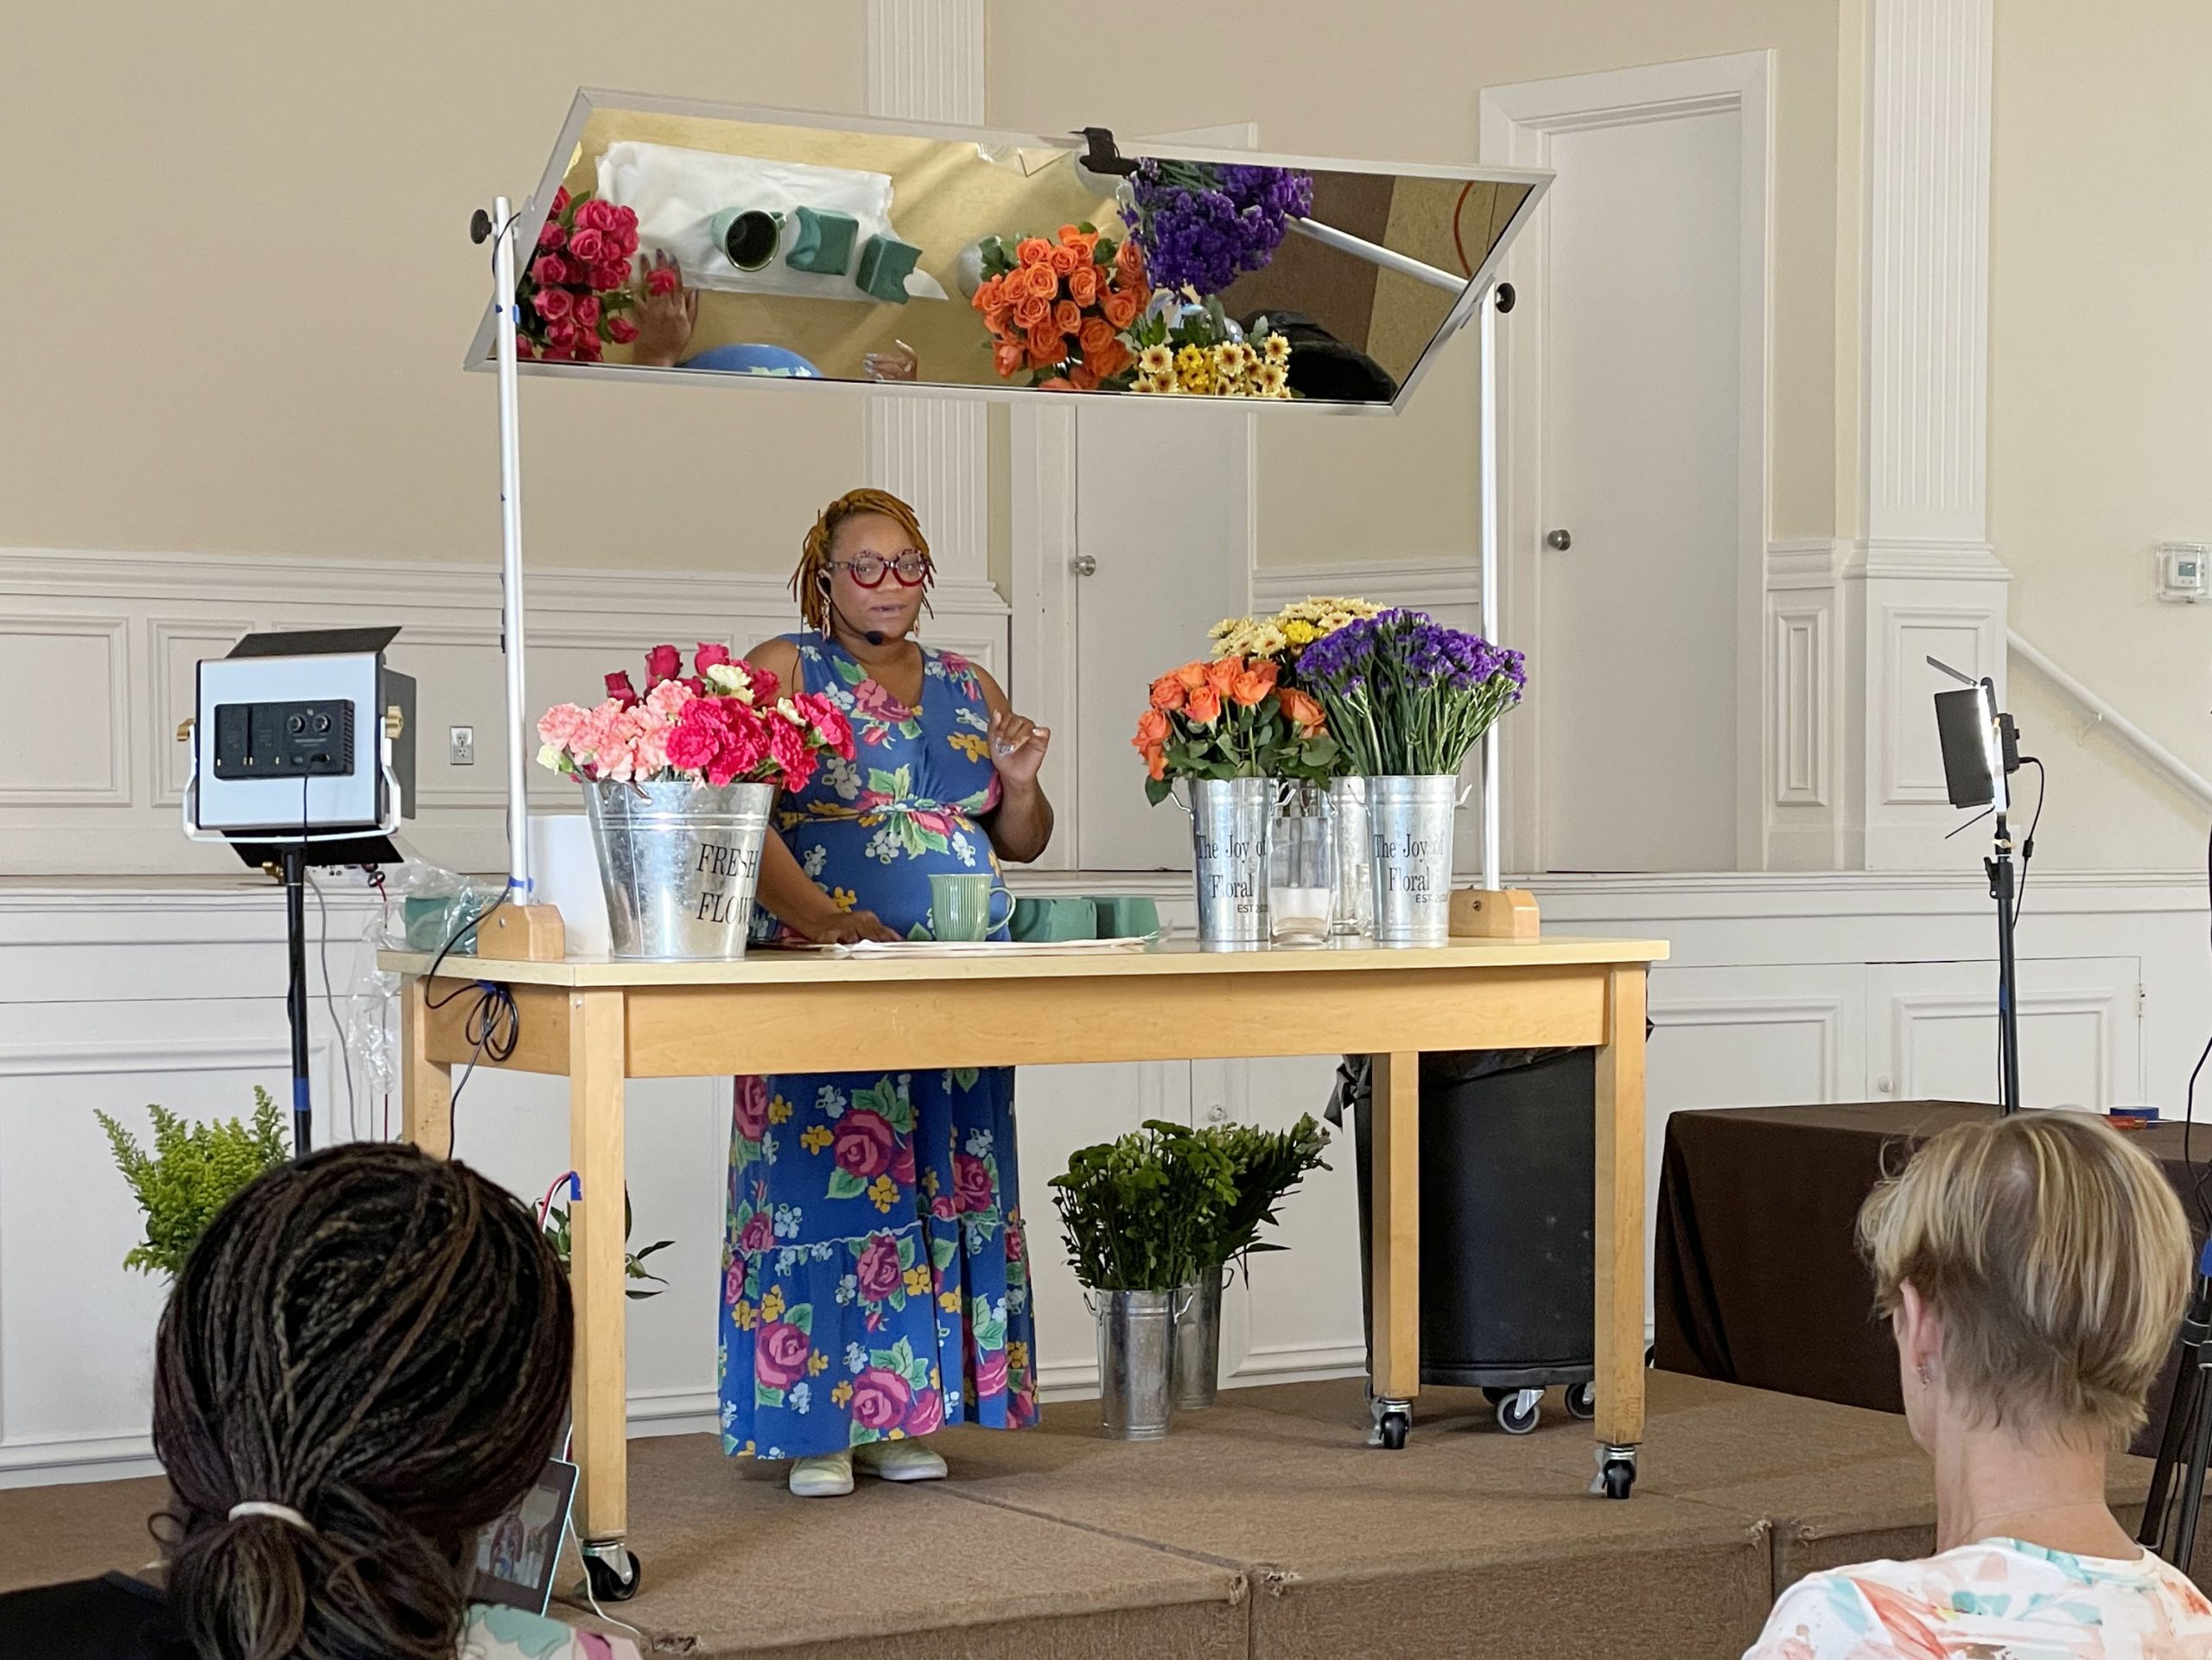 The instructor demonstrates flower arranging on stage